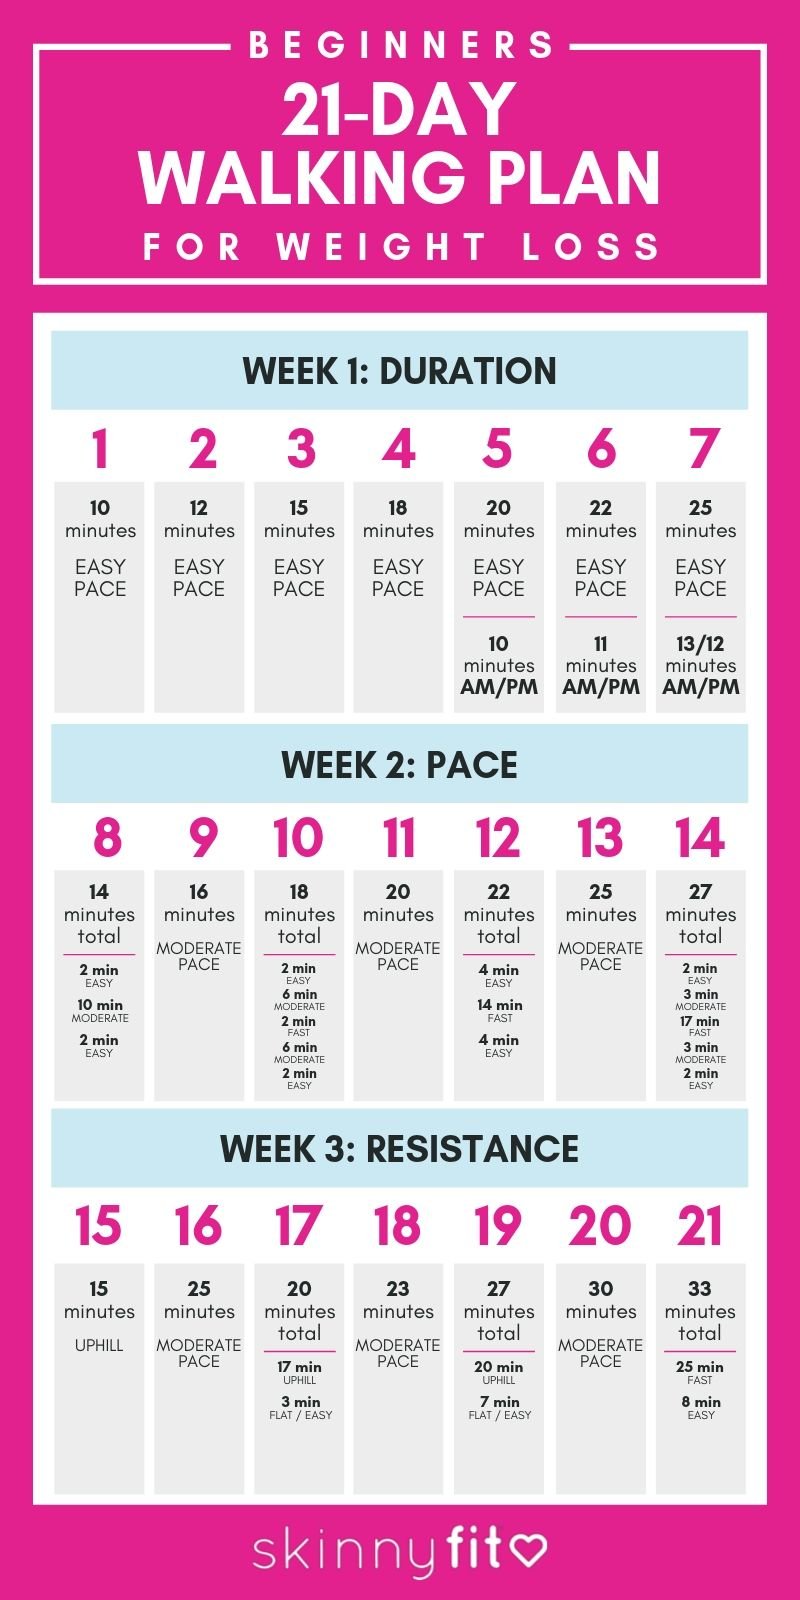 The Best 21-Day Walking Plan For Weight Loss (Beginners Guide)